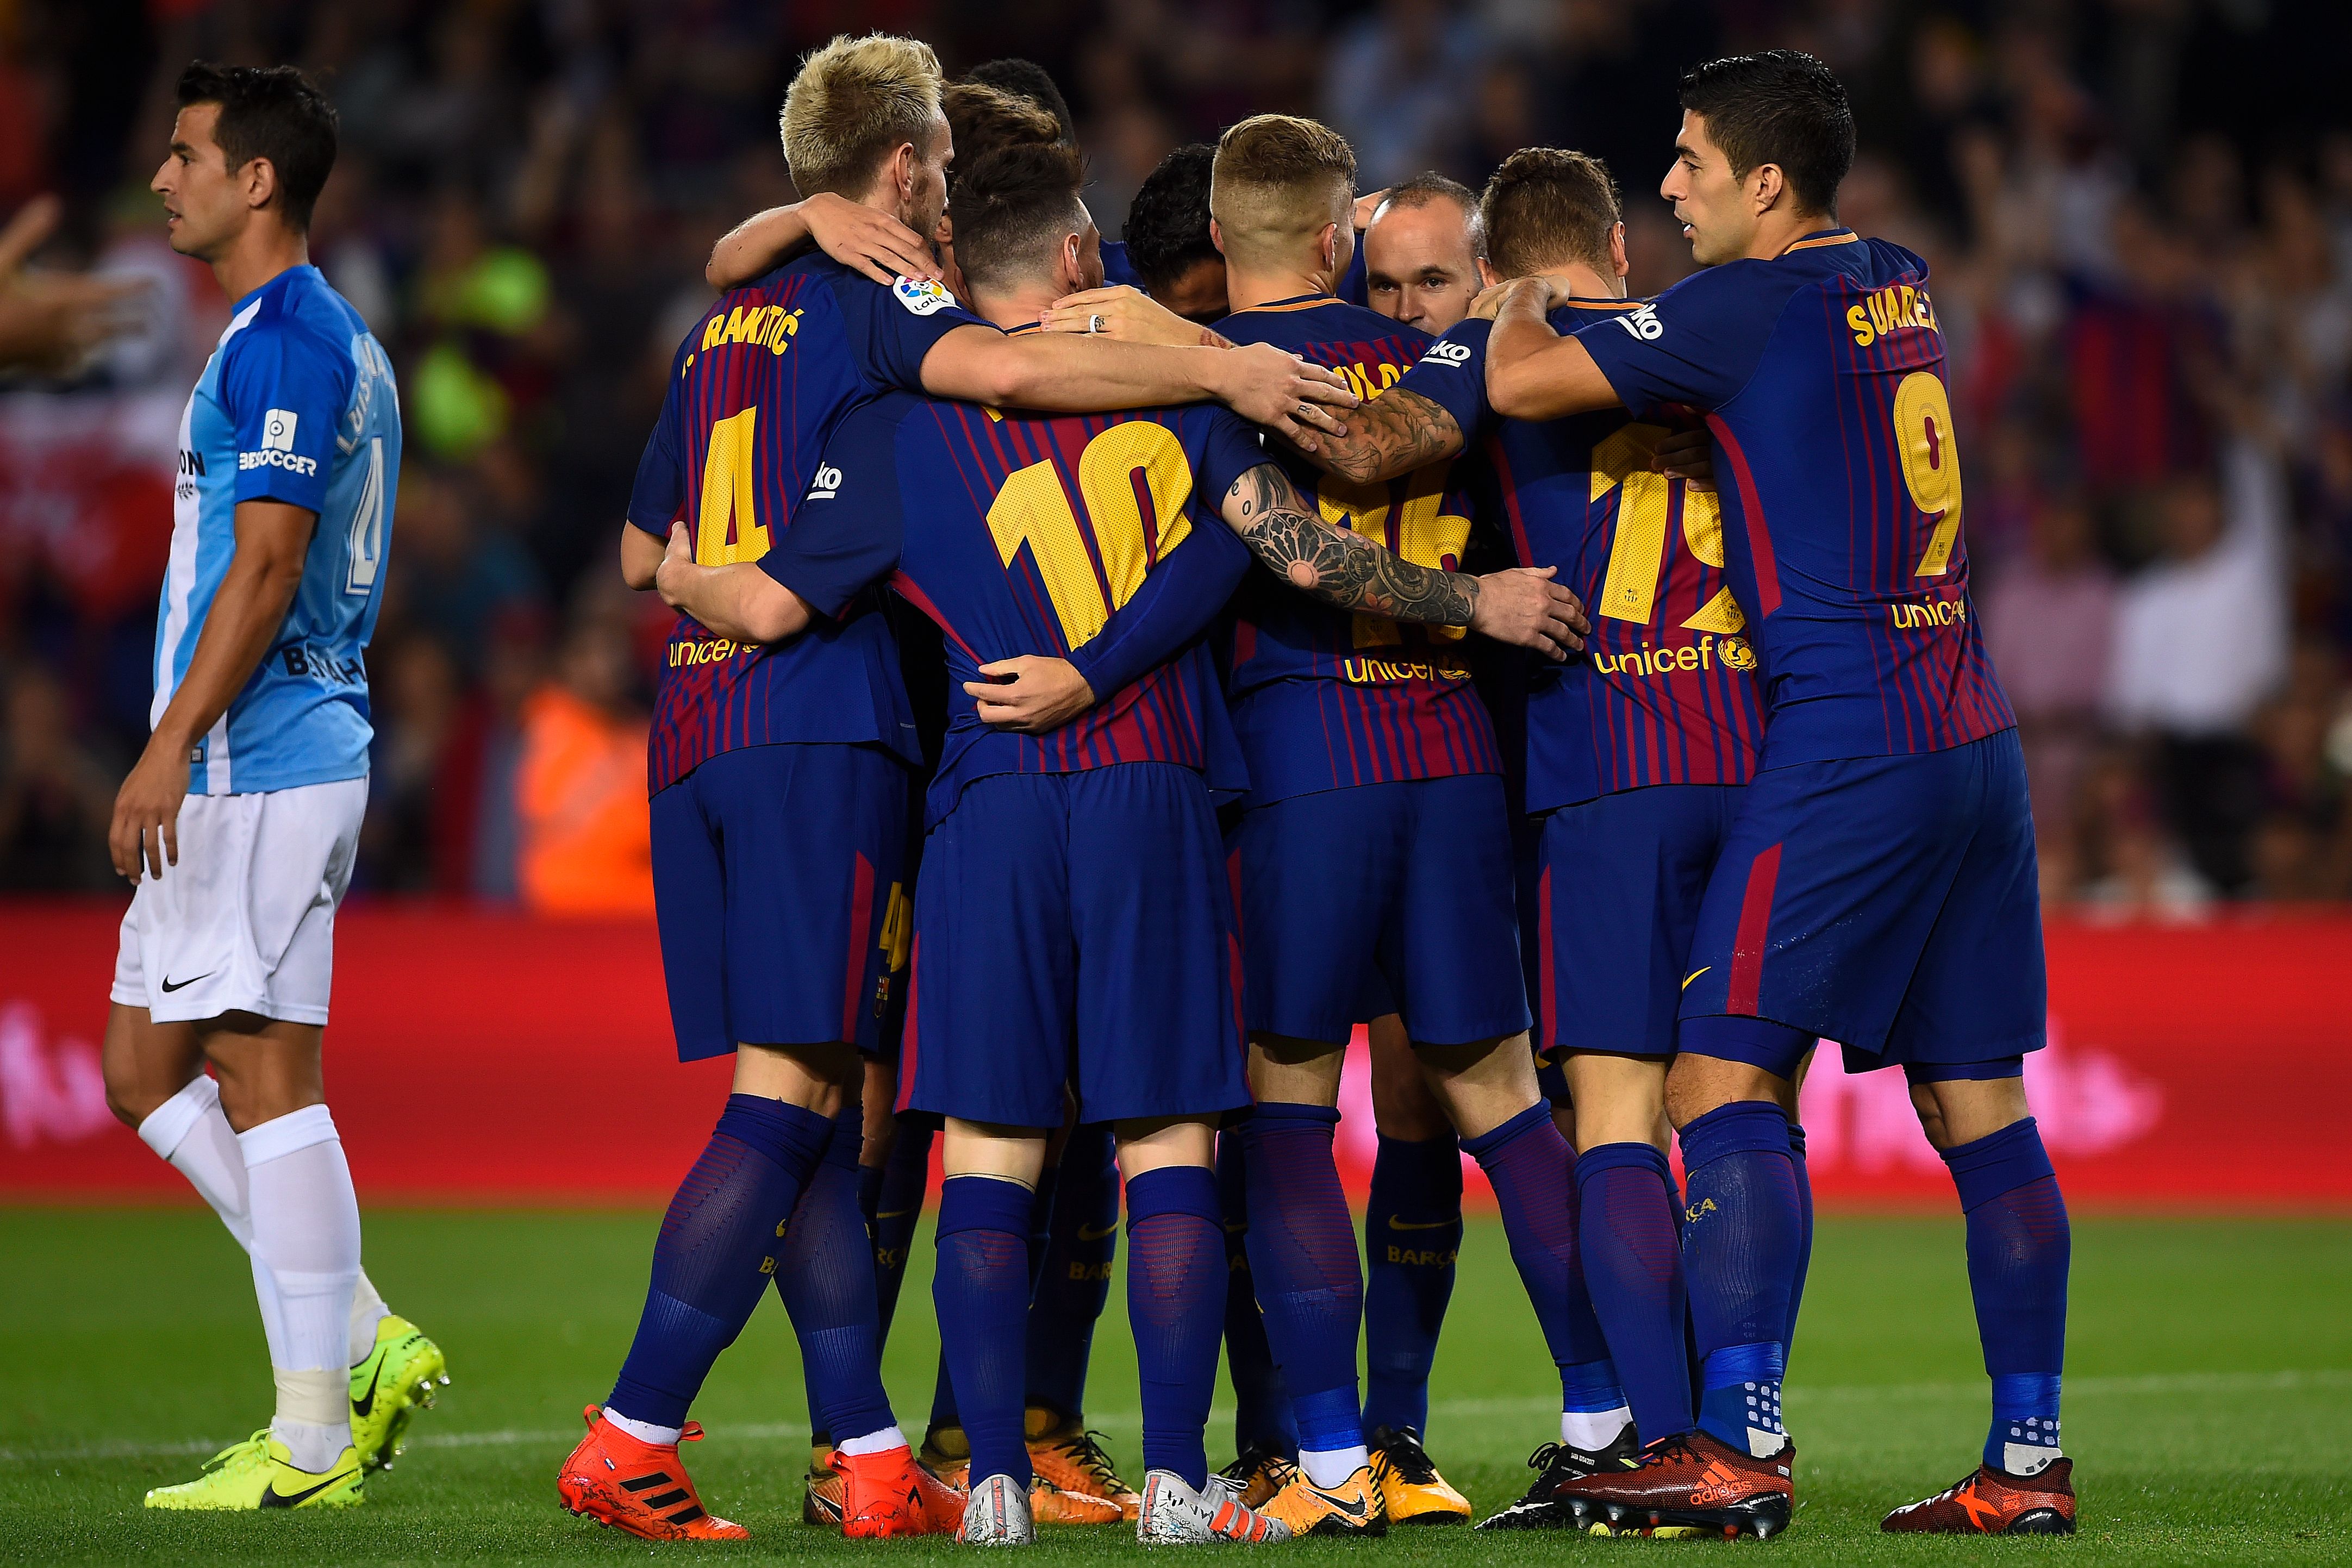 Barcelona's players celebrate after scoring a goal during the Spanish league football match FC Barcelona vs Malaga CF at the Camp Nou stadium in Barcelona on October 21, 2017. / AFP PHOTO / Josep LAGO        (Photo credit should read JOSEP LAGO/AFP/Getty Images)